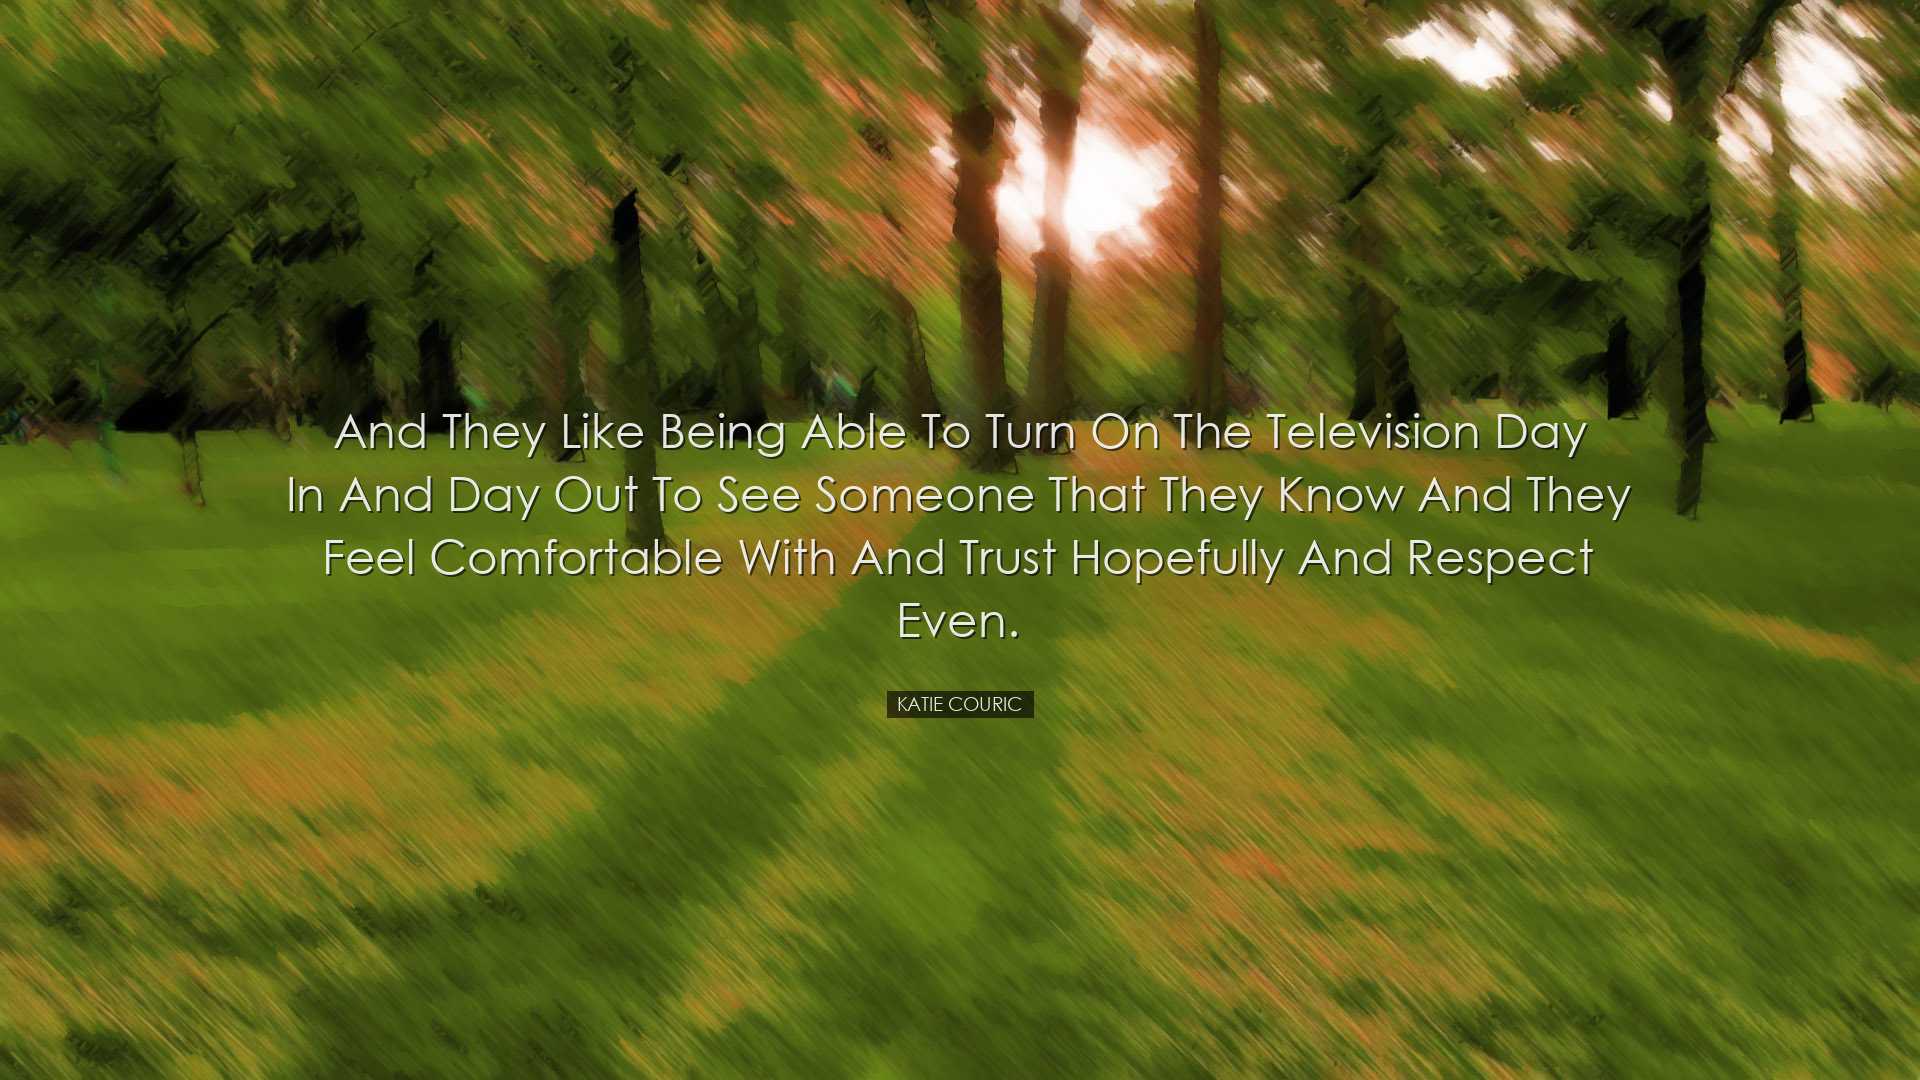 And they like being able to turn on the television day in and day